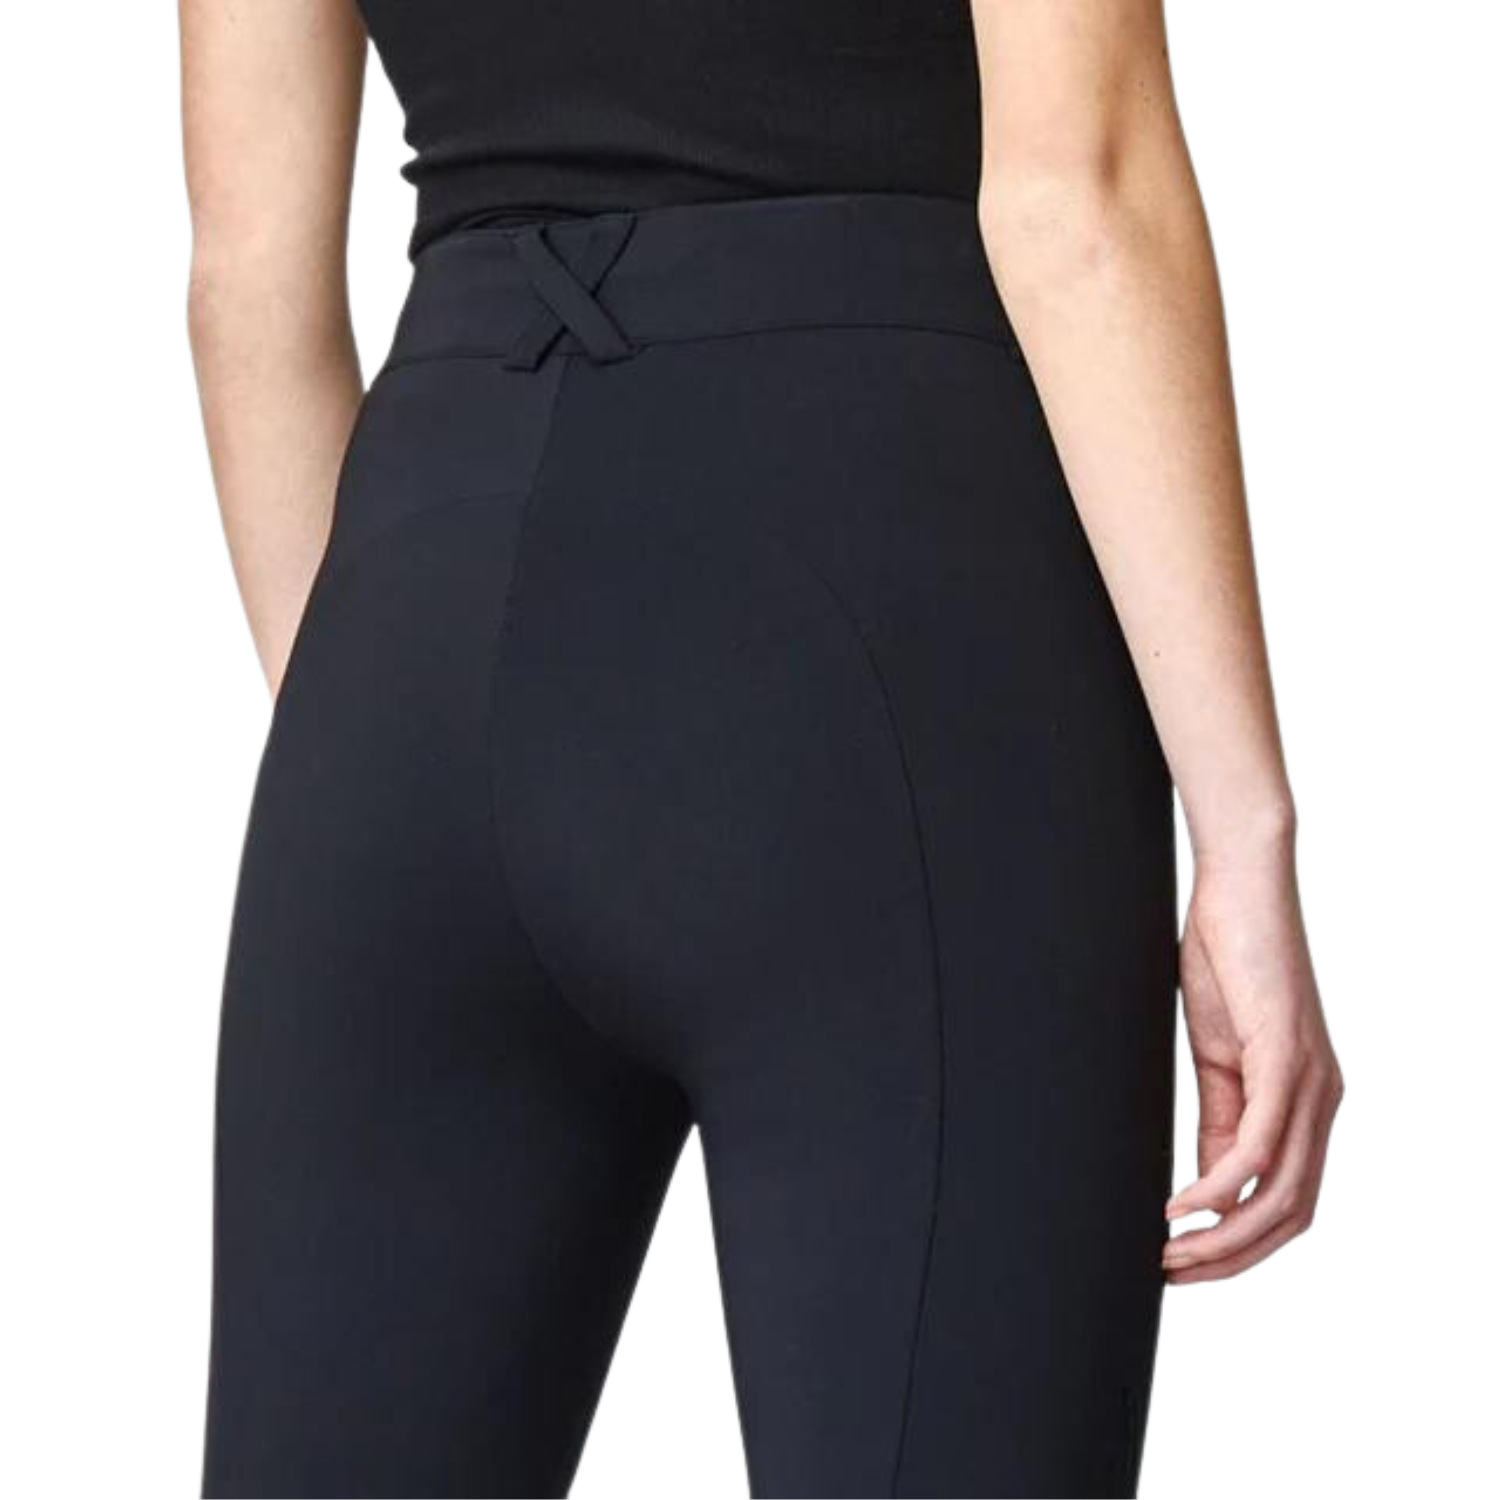 Ladies Extra High-Rise Compression Knee Grip Breeches - Black